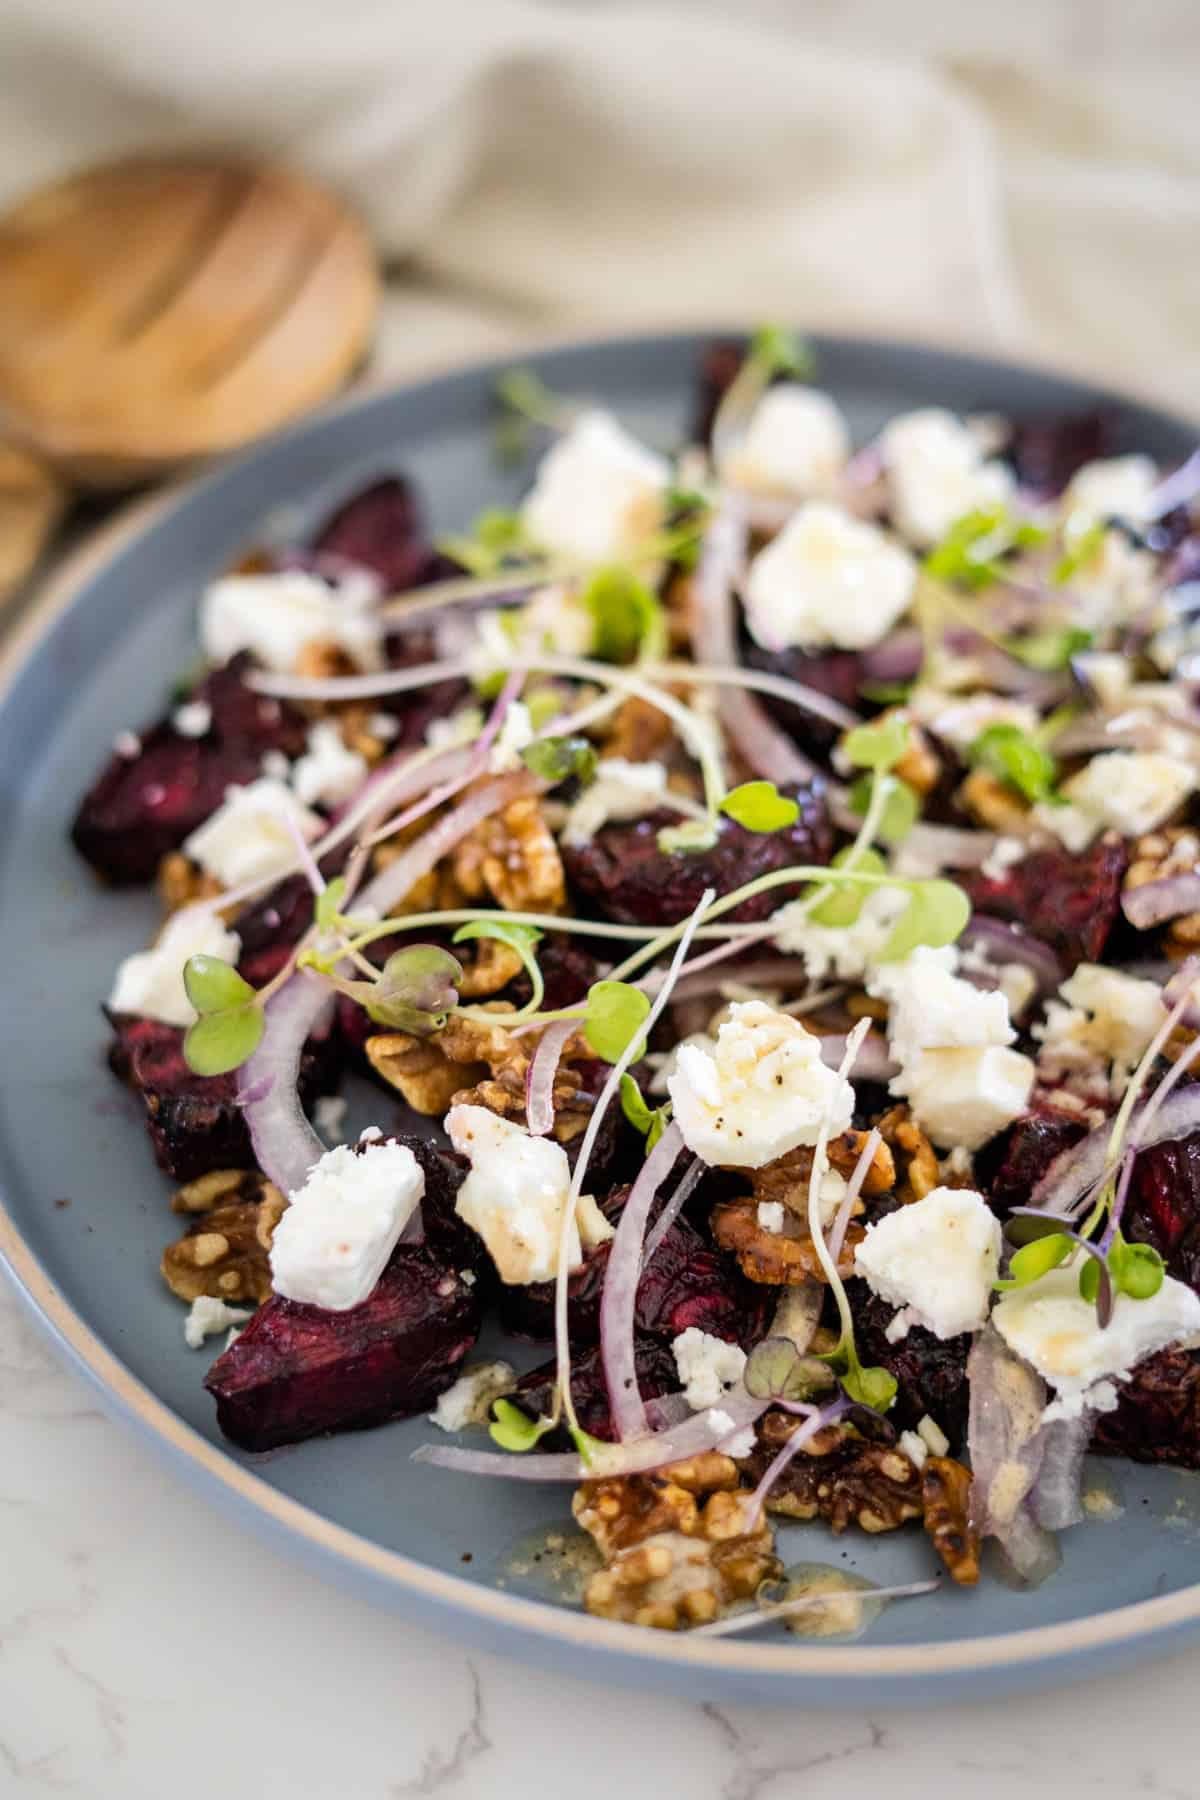 Beet salad with goat cheese and walnuts.